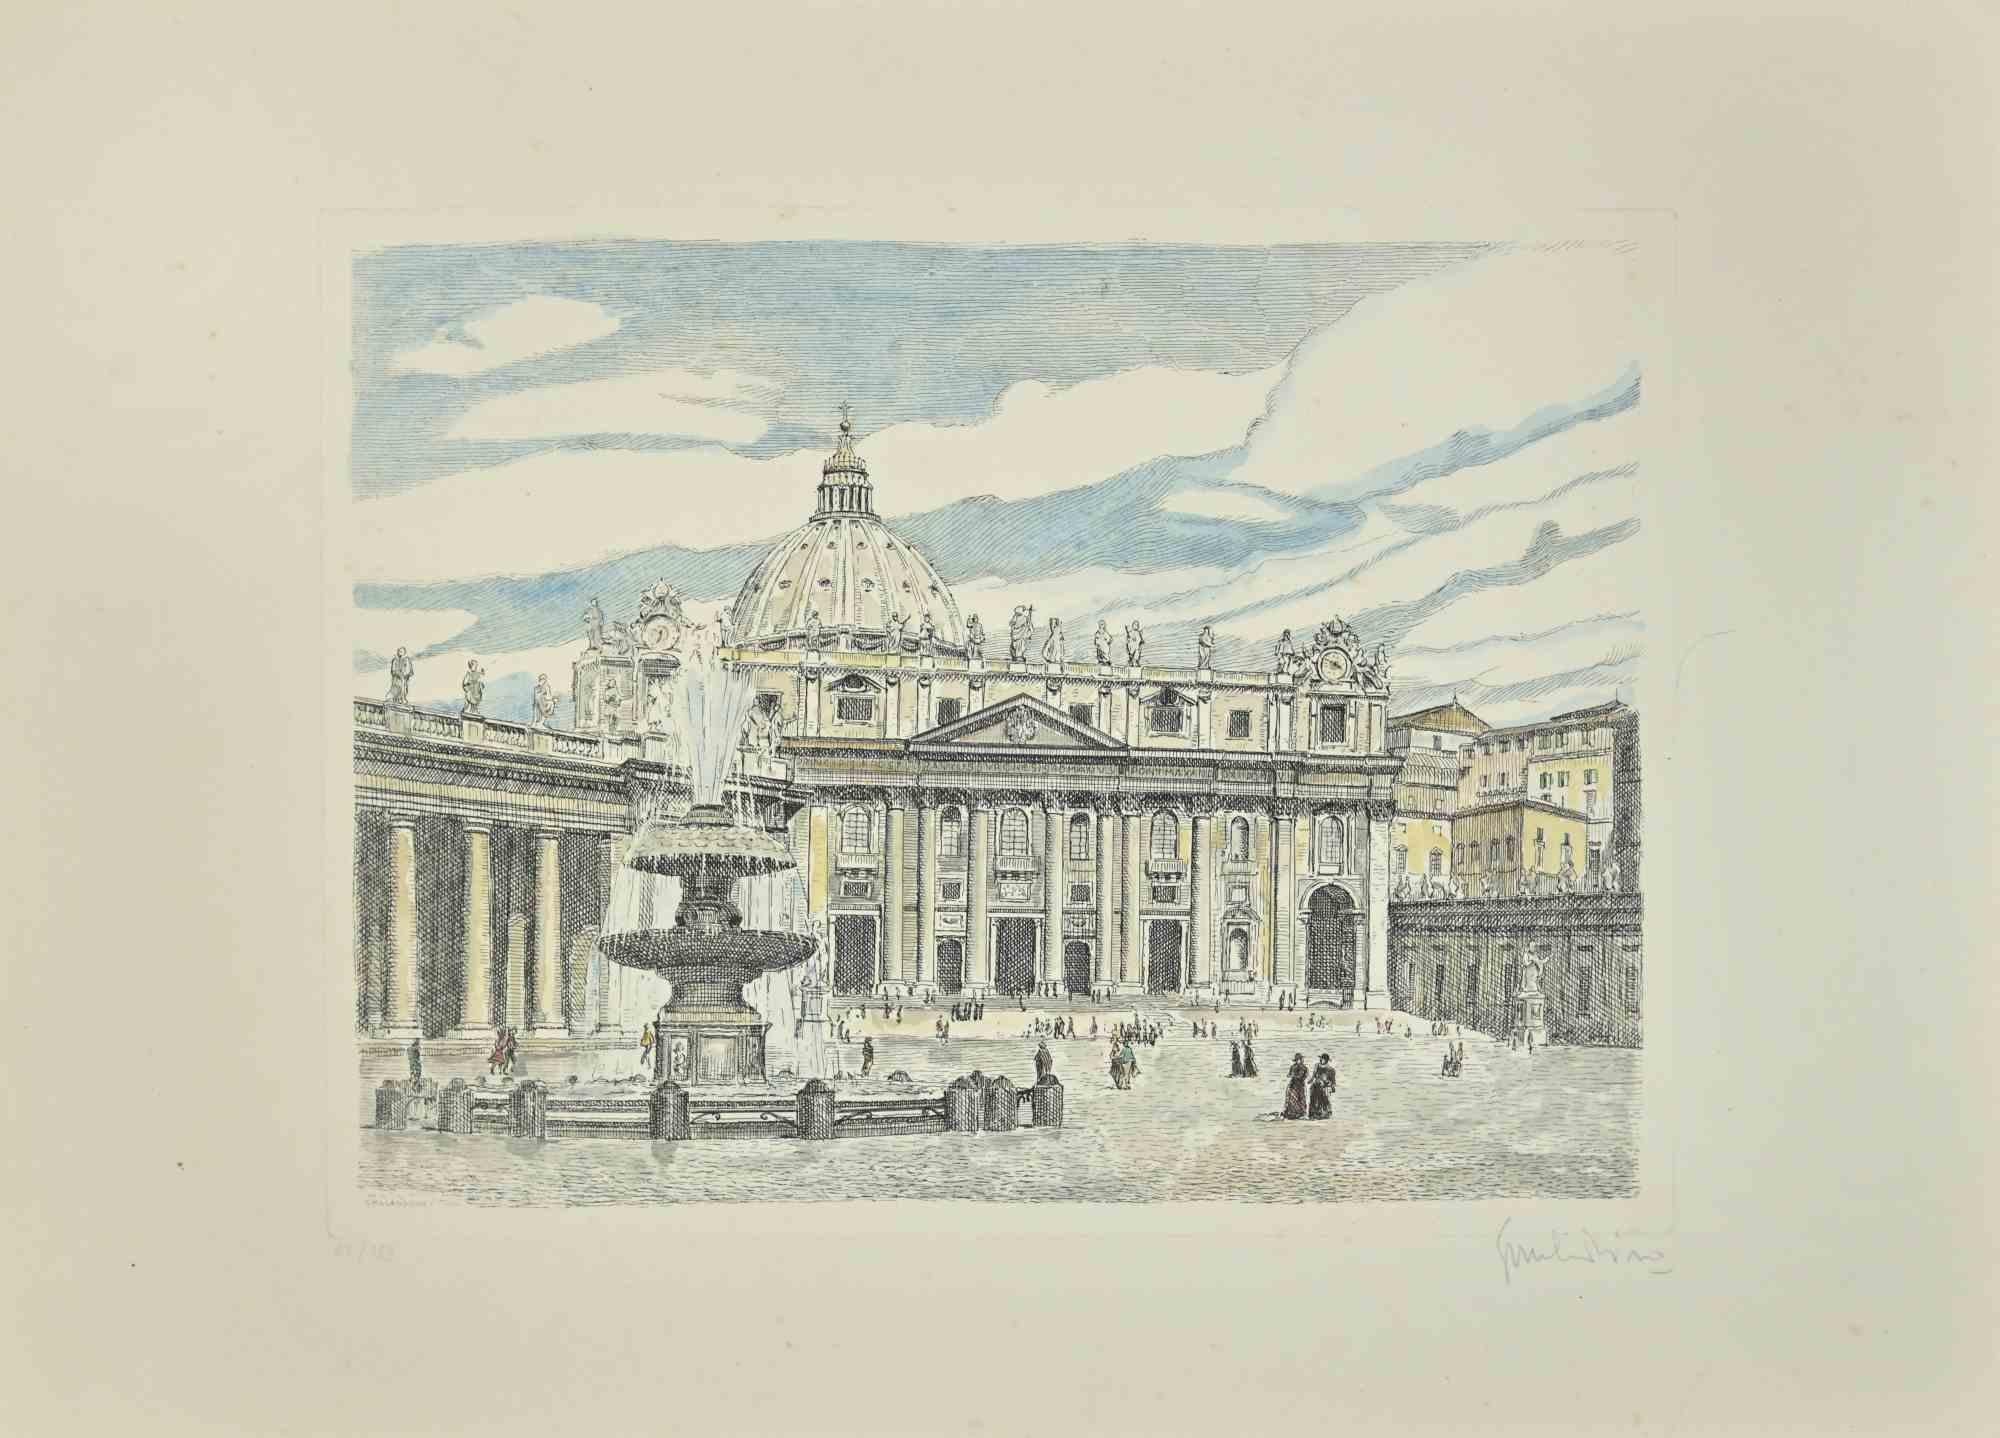 St. Peter's Square is an etching realized by the Italian artist  Giuseppe Malandrino.

hand-signed by the artist  on the lower right in pencil.

Numbered in Roman numerals, edition o 62/199 prints.

Perfect conditions. 

The artwork represents a